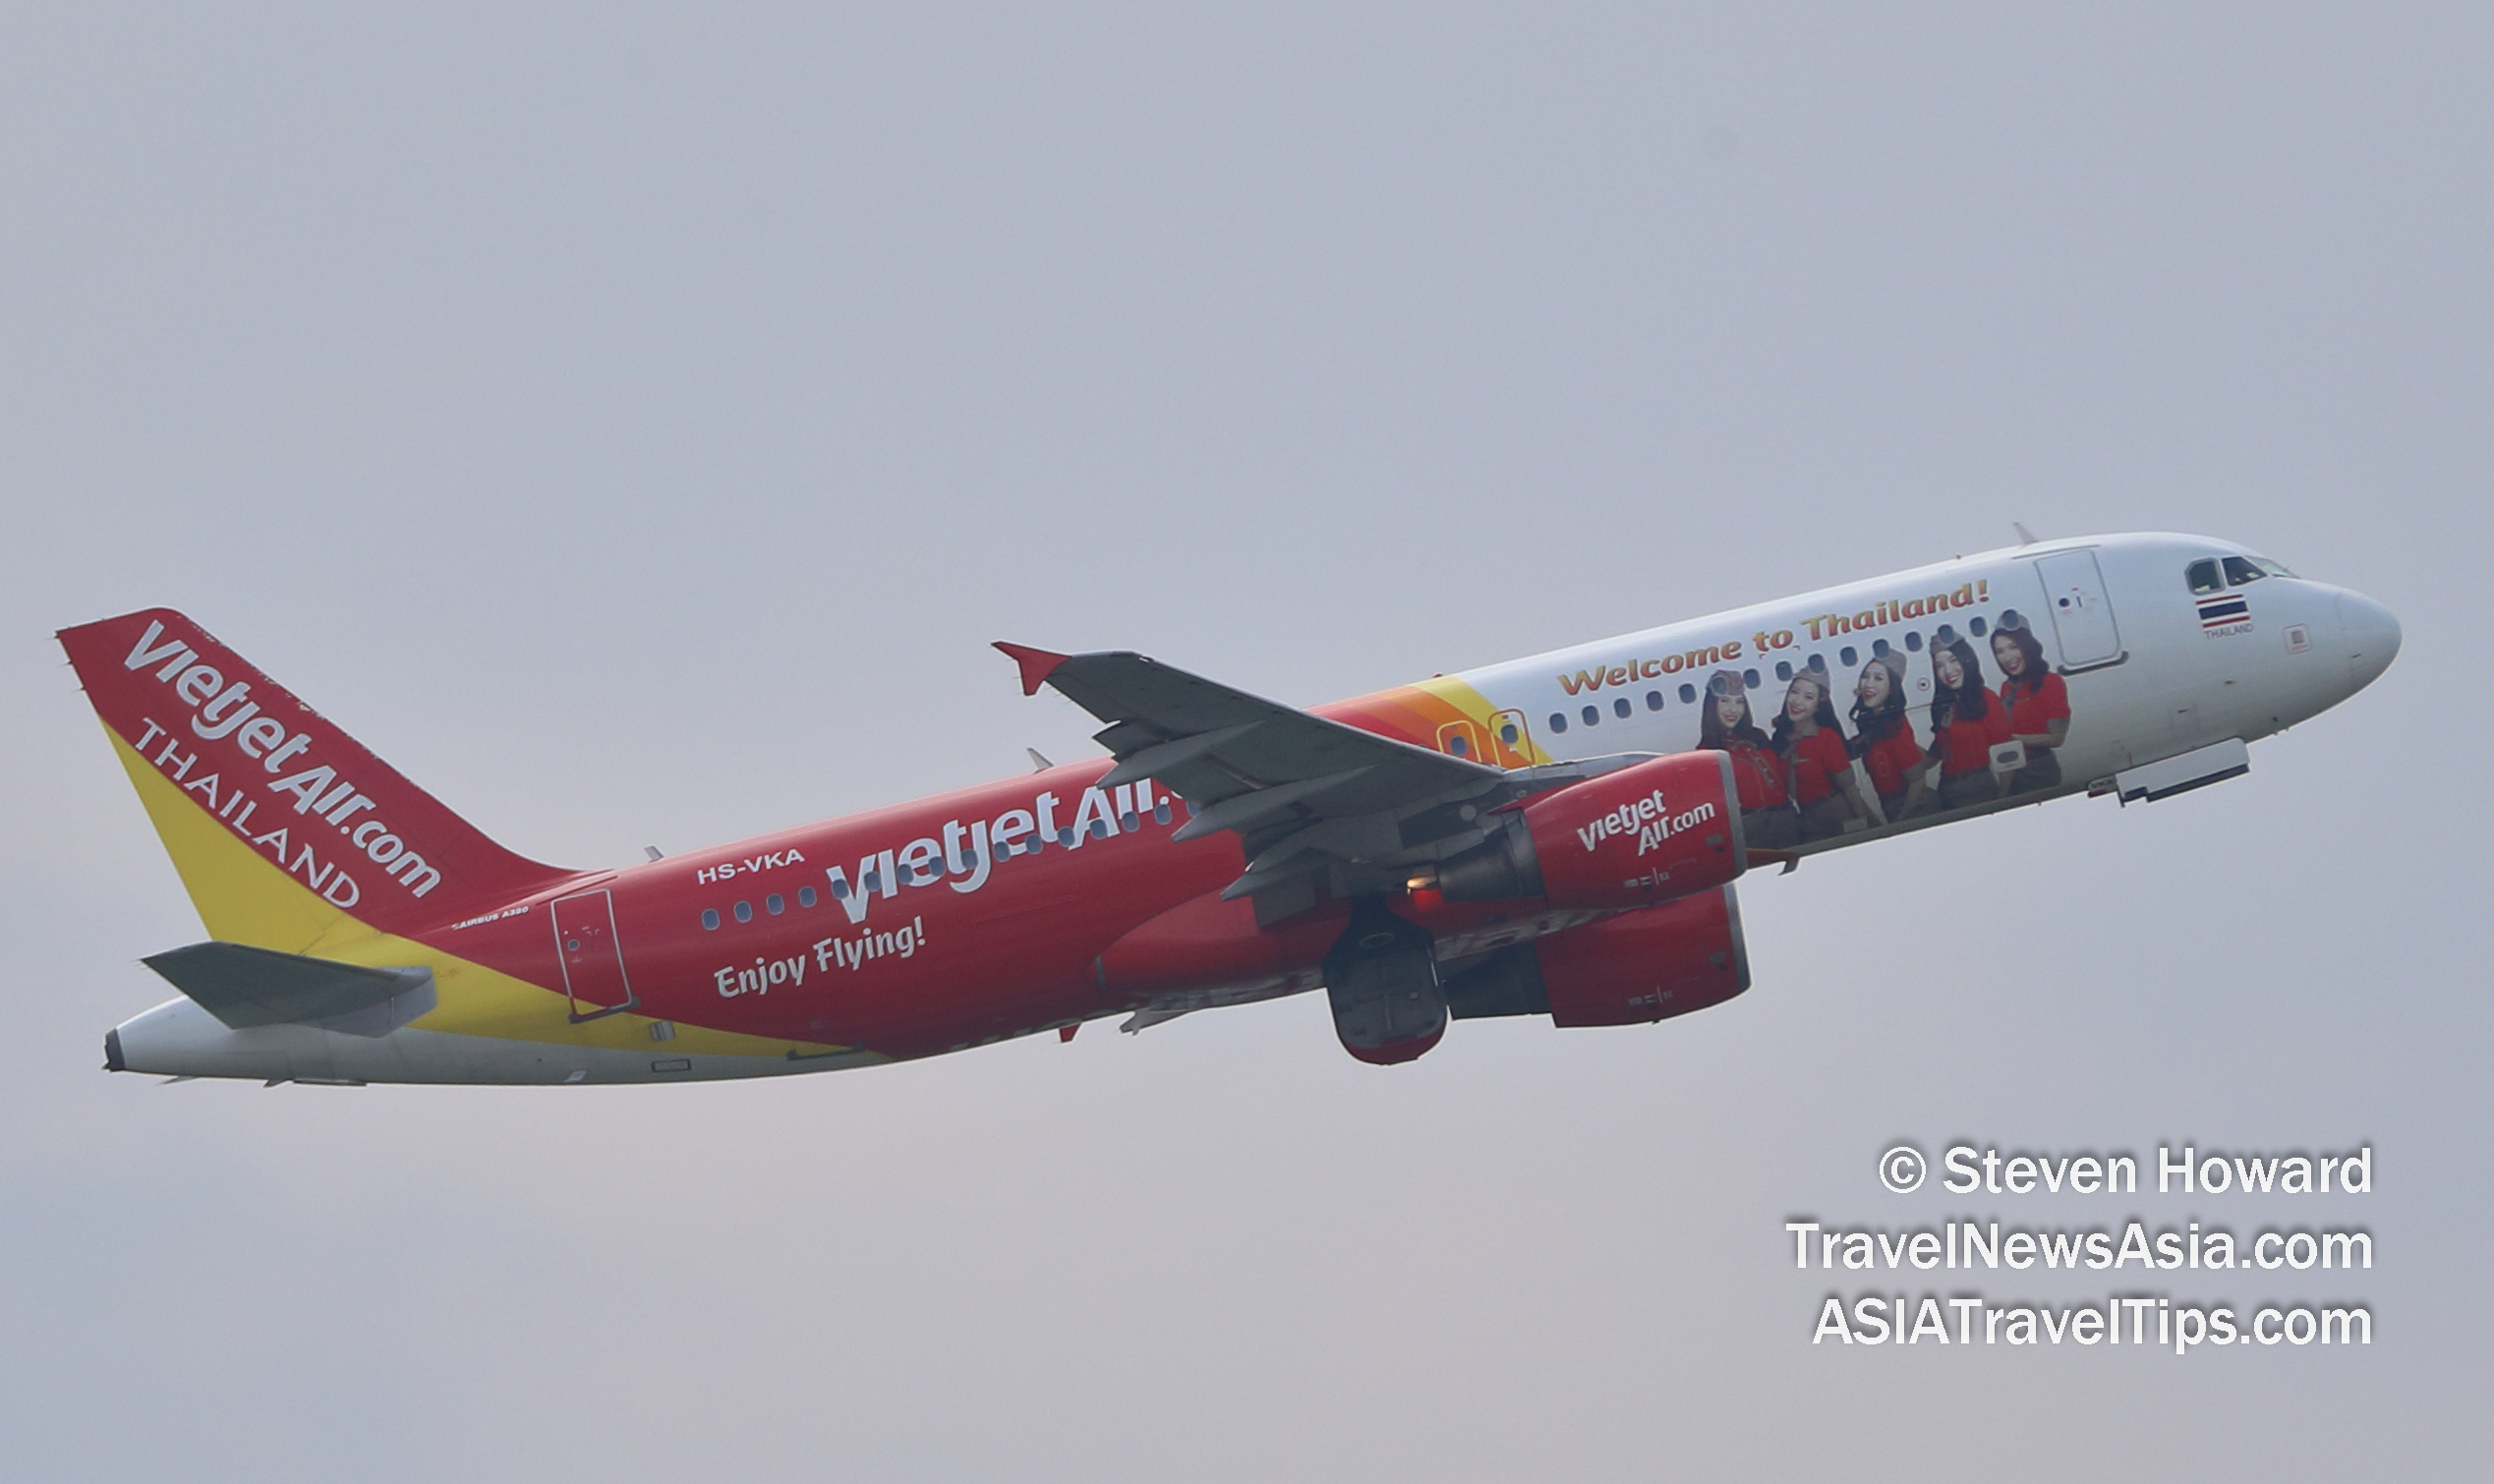 Thai Vietjet Airbus A320 reg: HS-VKA. Picture by Steven Howard of TravelNewsAsia.com Click to enlarge.